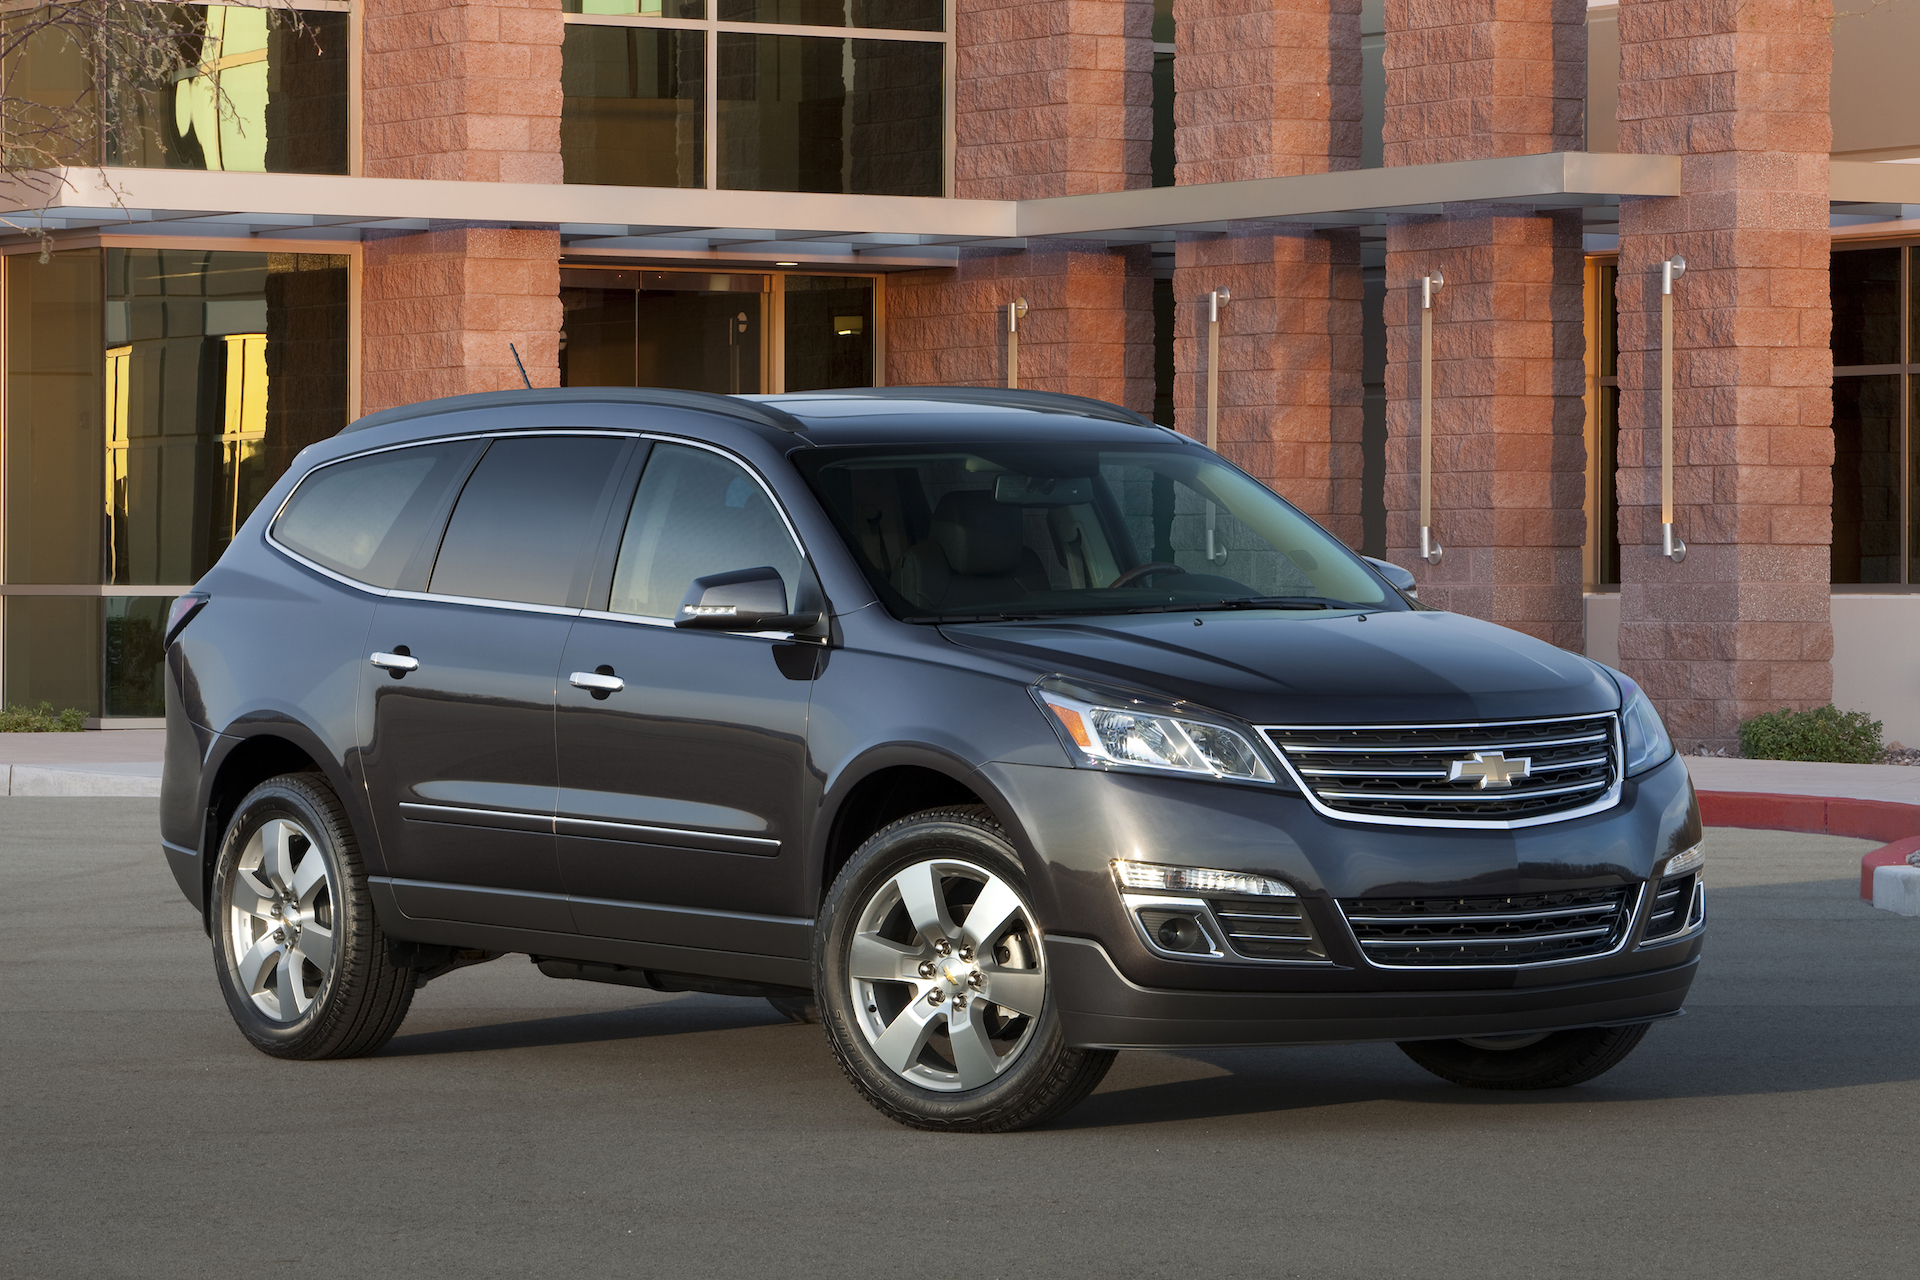 GM recalls nearly one million SUVs over exploding airbag inflators